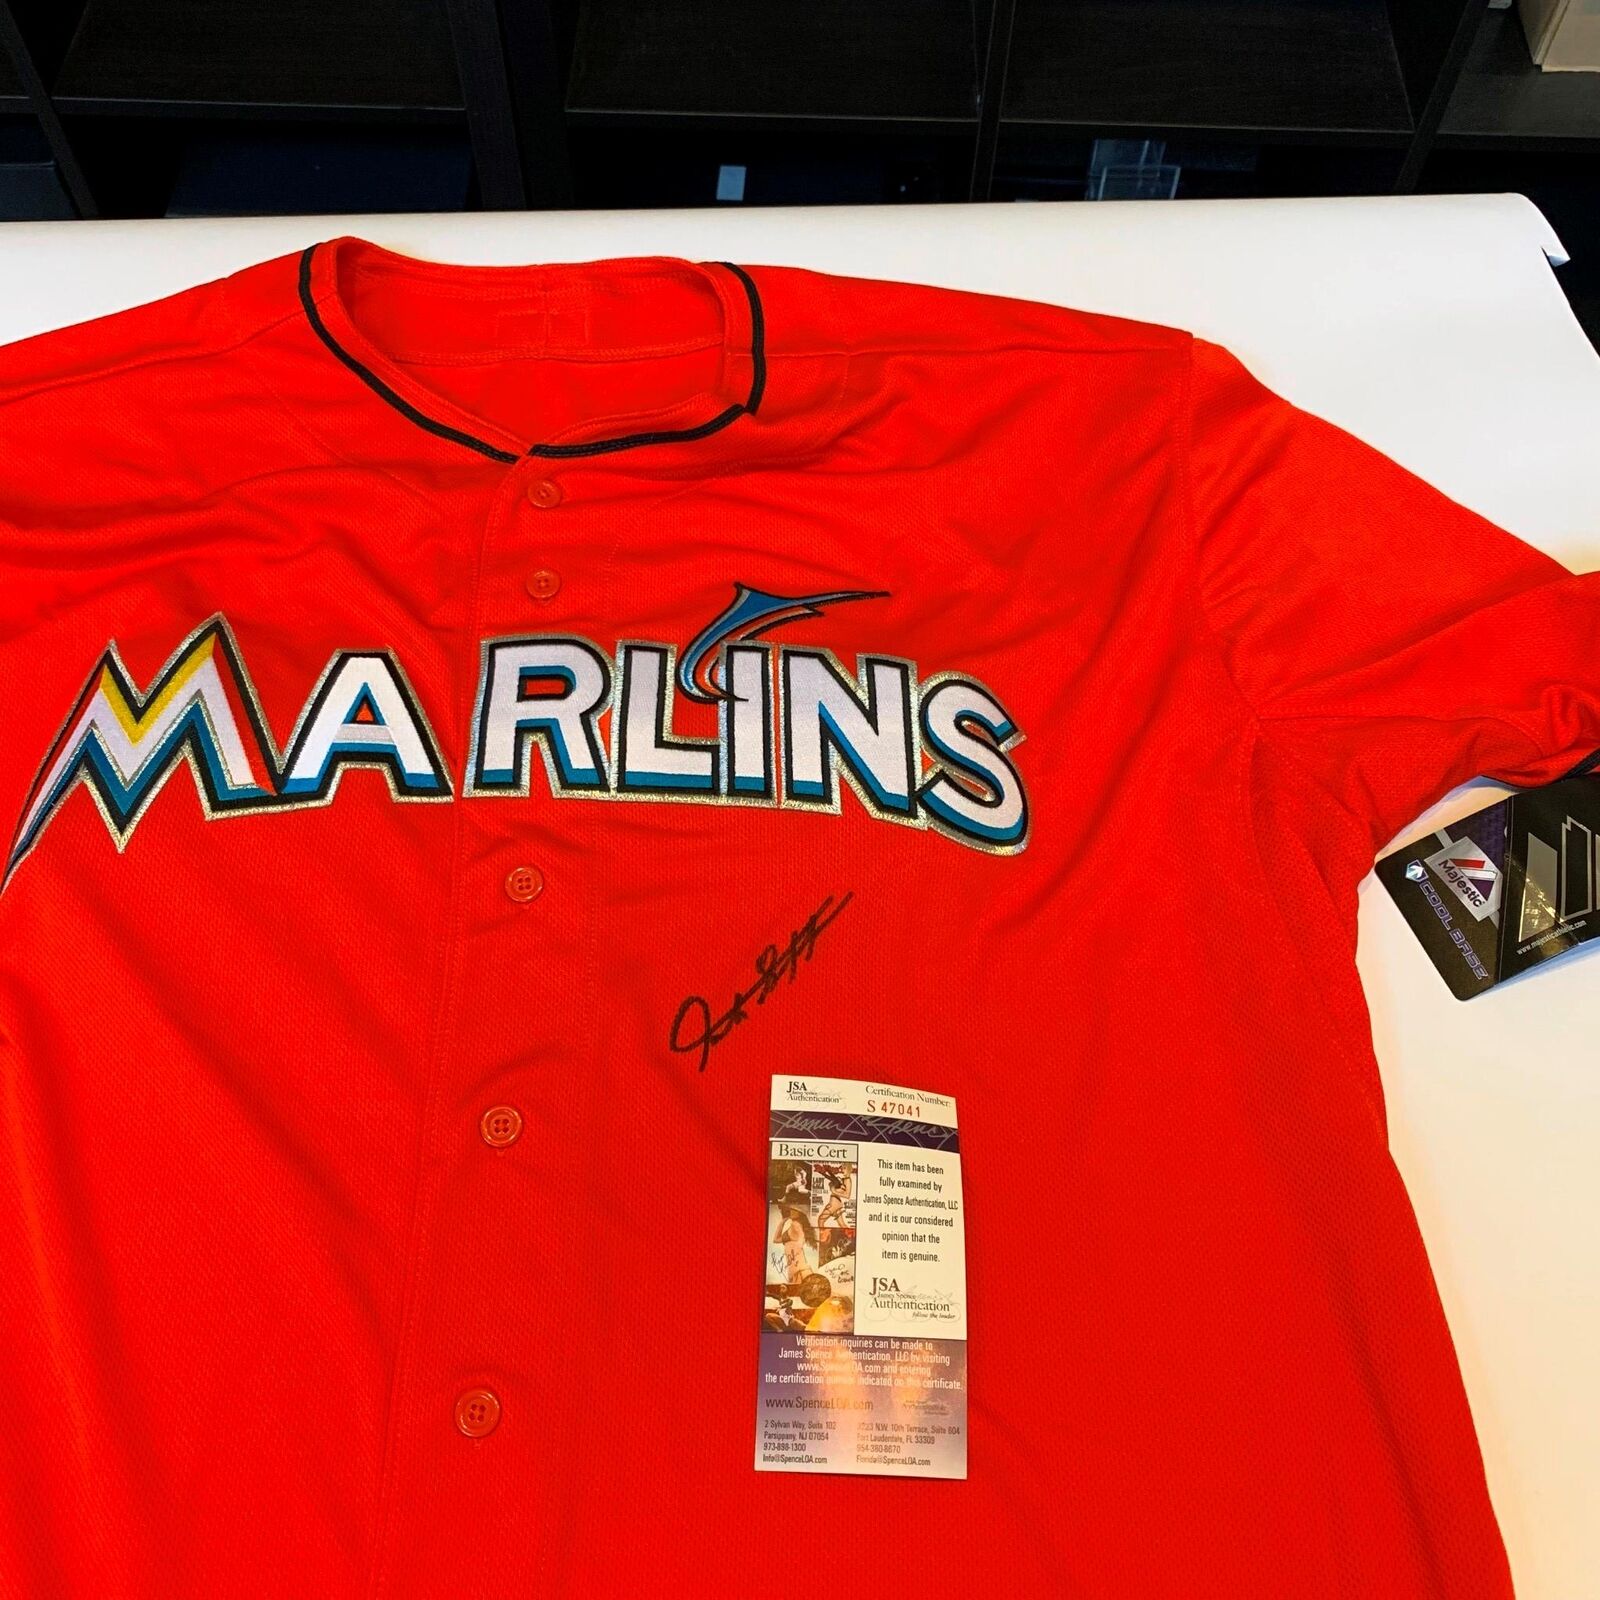 Giancarlo Stanton Signed Authentic Majestic Miami Marlins Jersey With —  Showpieces Sports